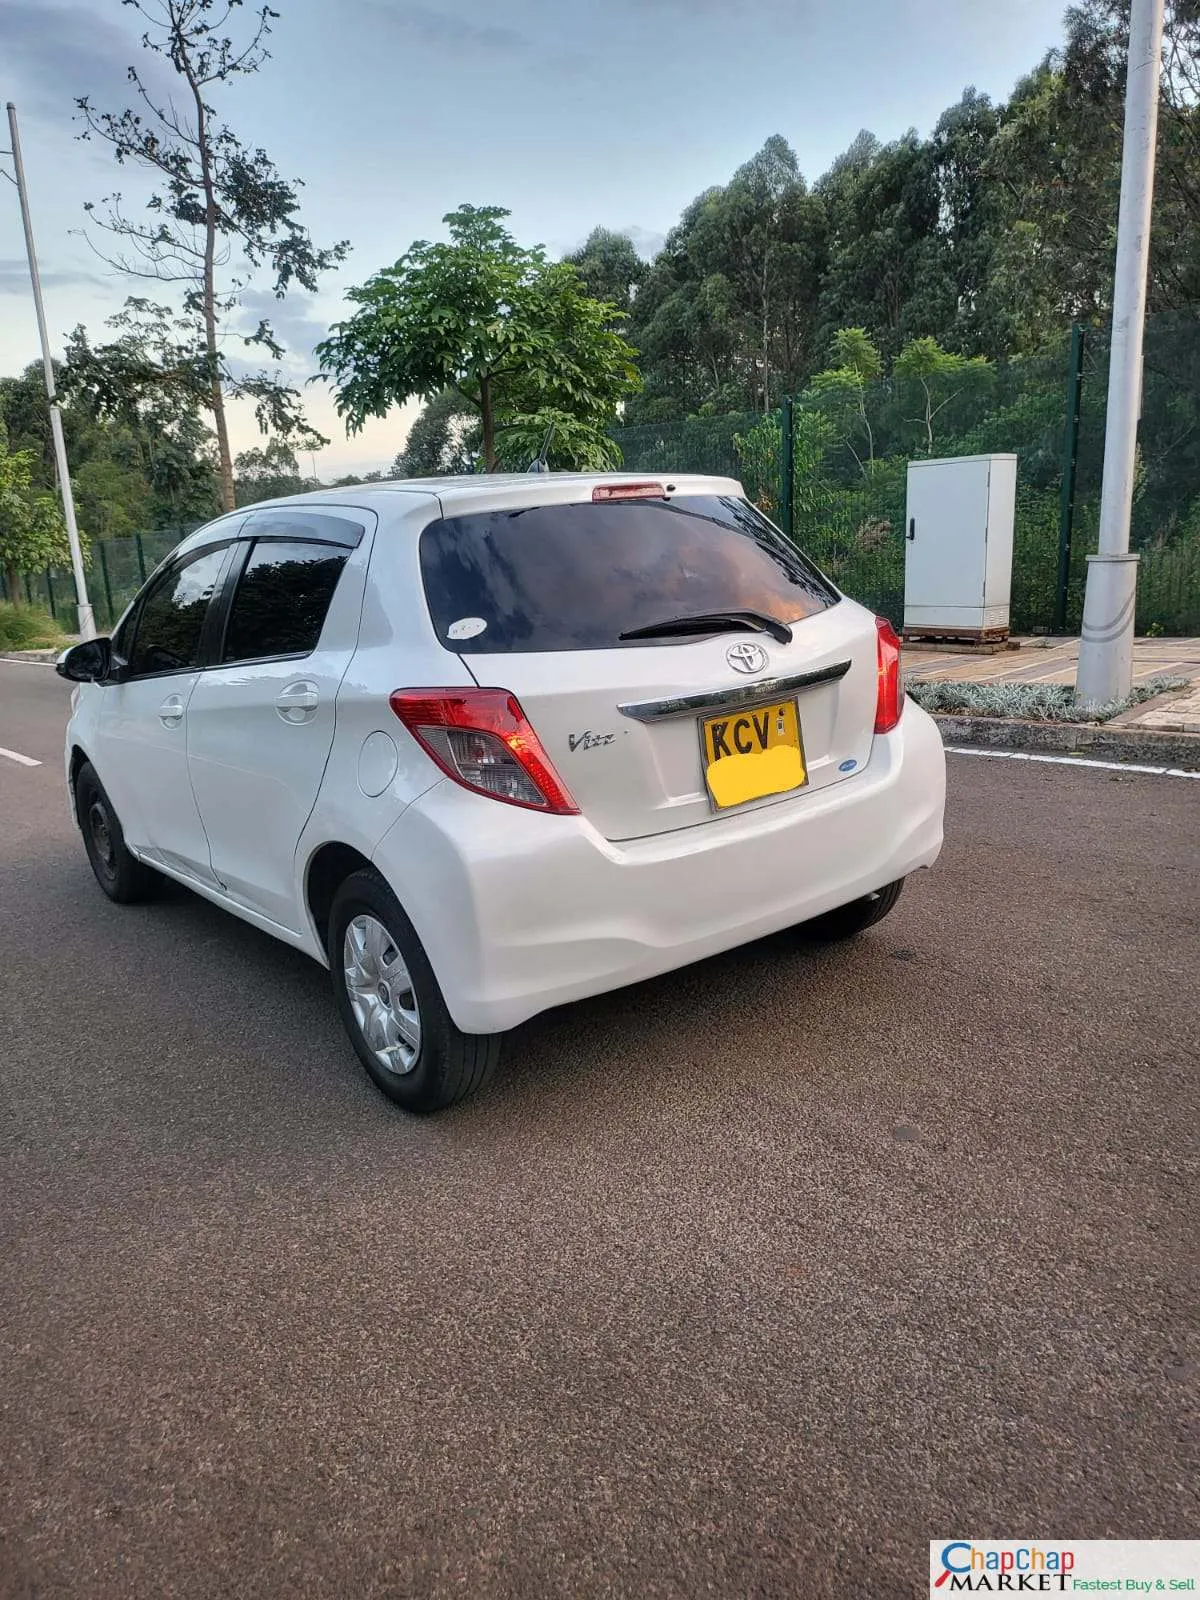 Toyota Vitz NEW SHAPE You PAY 30% Deposit INSTALLMENTS Trade in Ok New QUICK SALE (SOLD)